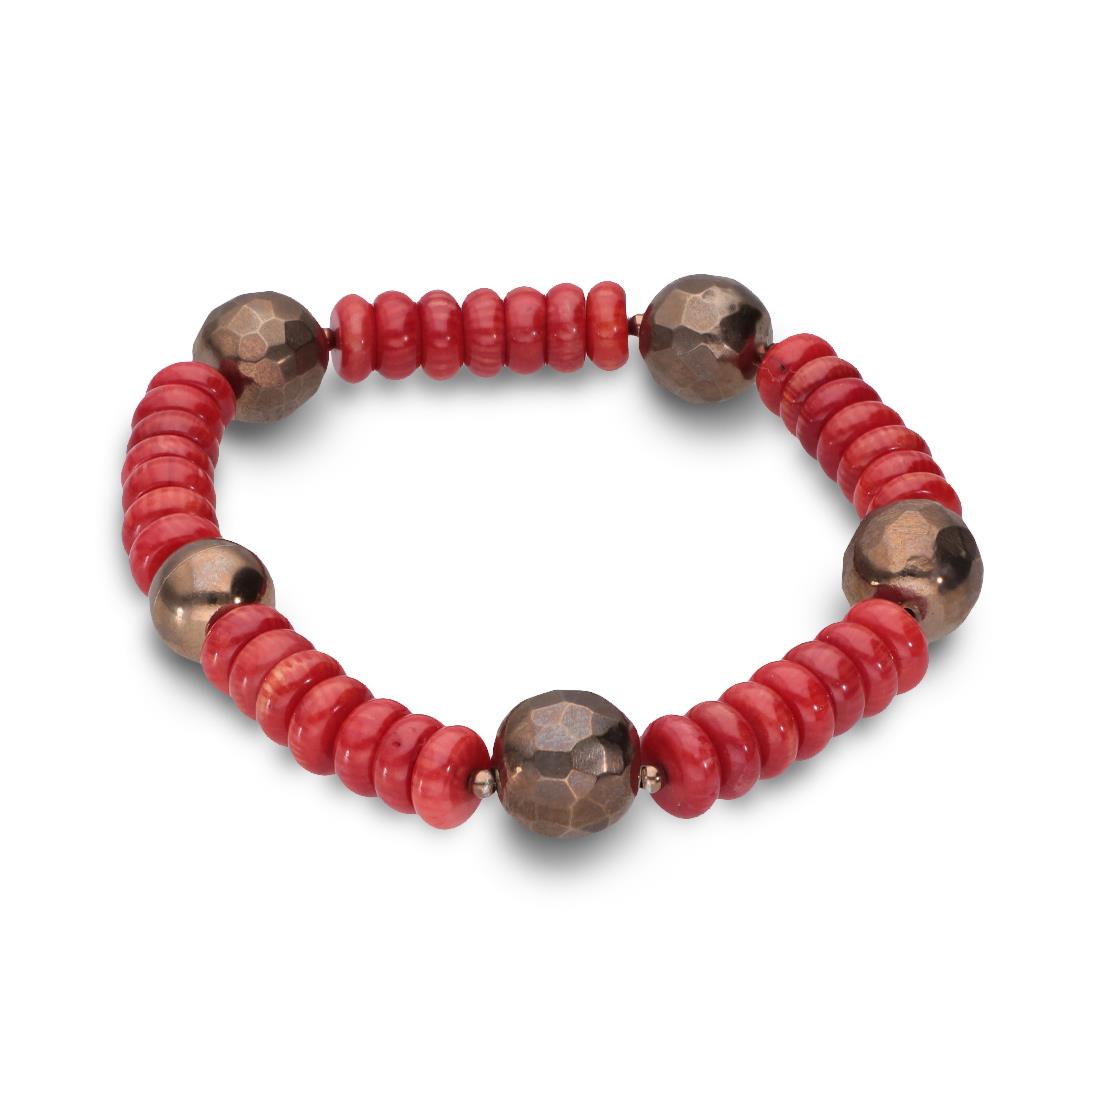 Bracelet with bamboo beads - TOSCANA BY ETRUSCA